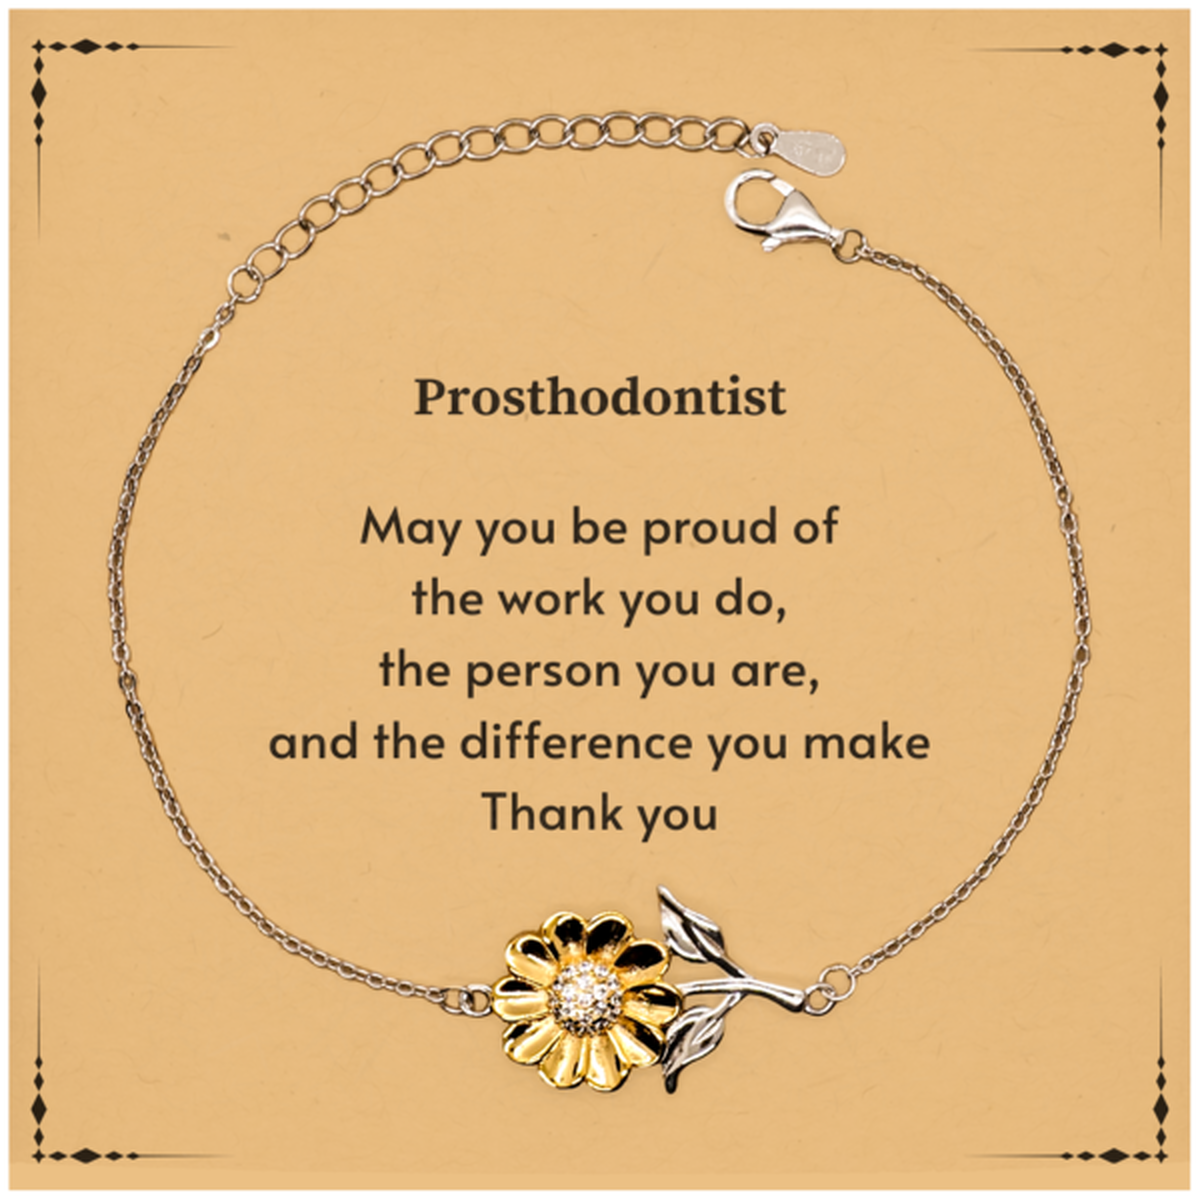 Heartwarming Sunflower Bracelet Retirement Coworkers Gifts for Prosthodontist, Prosthodontist May You be proud of the work you do, the person you are Gifts for Boss Men Women Friends